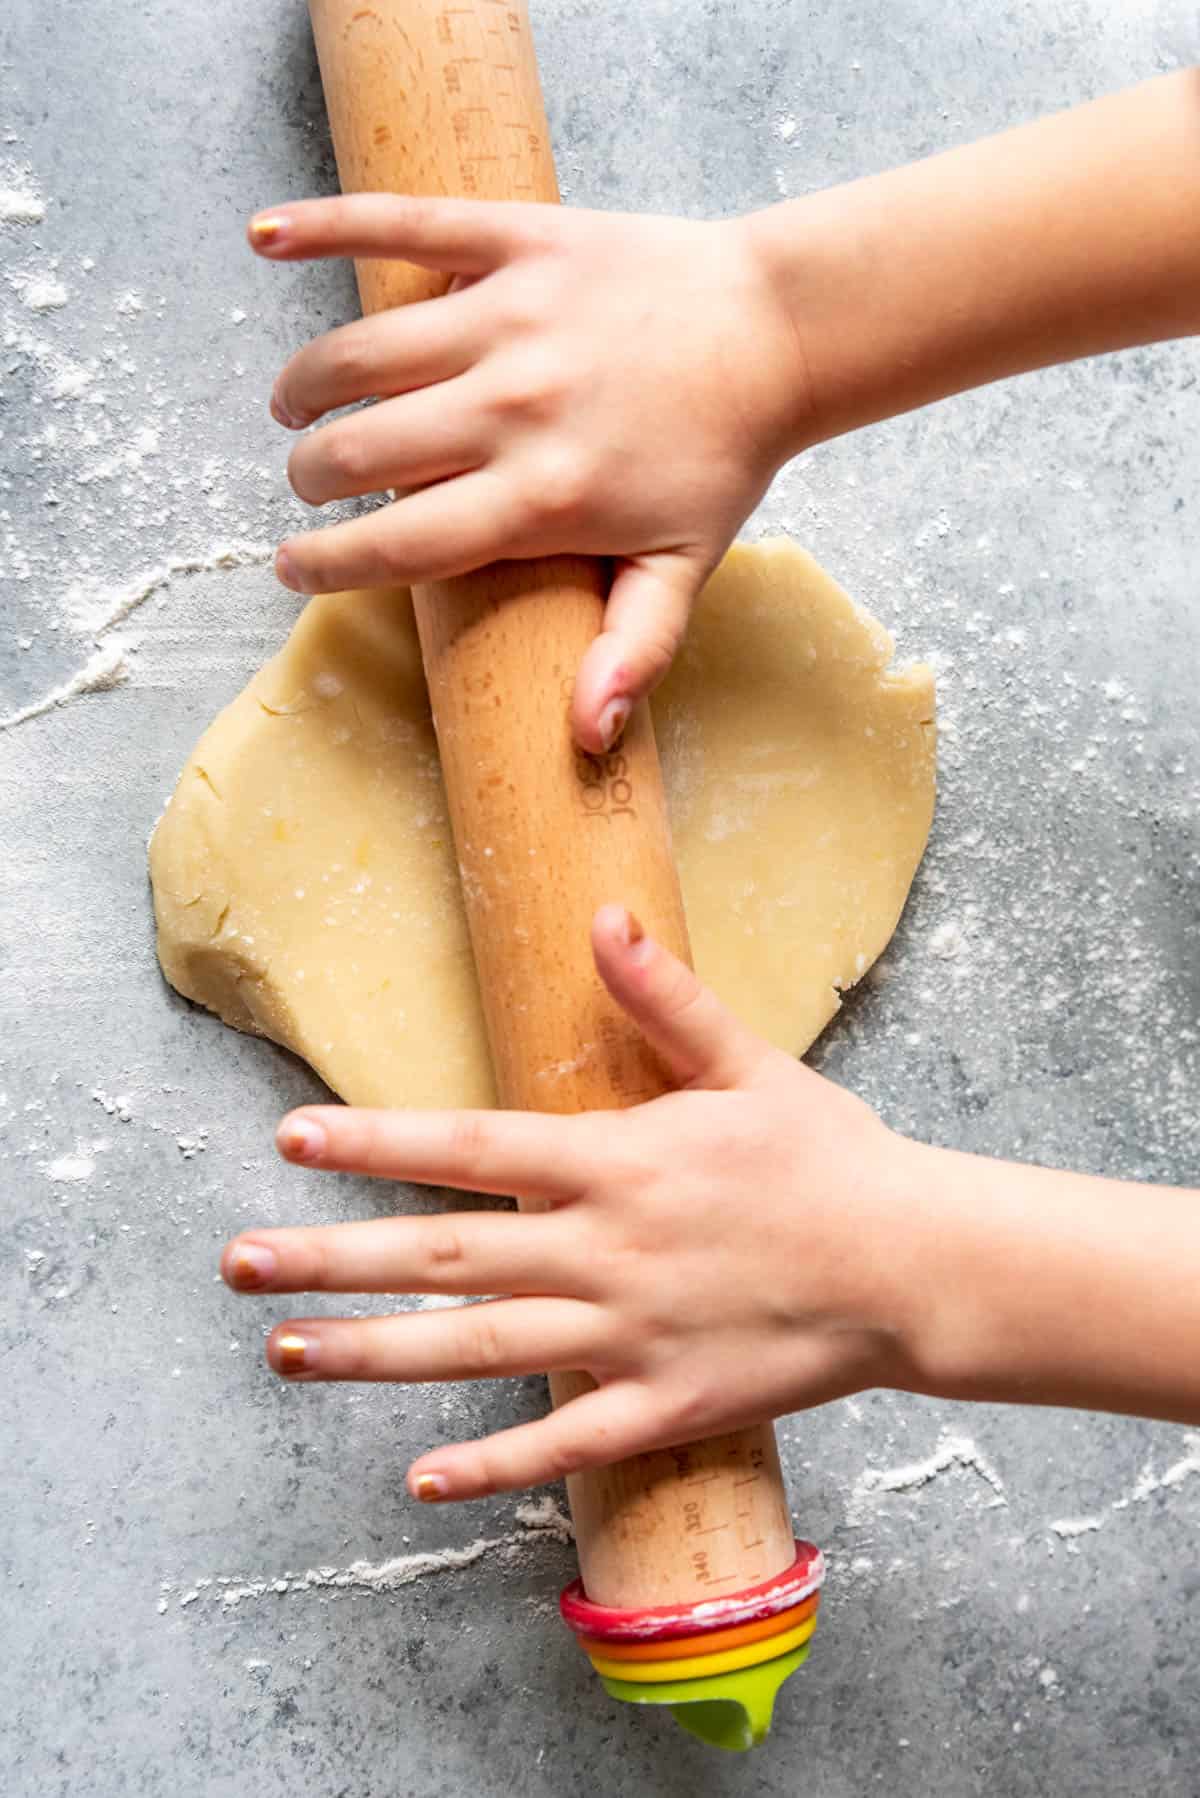 Hands rolling out sugar cookie dough with a wooden rolling pin.